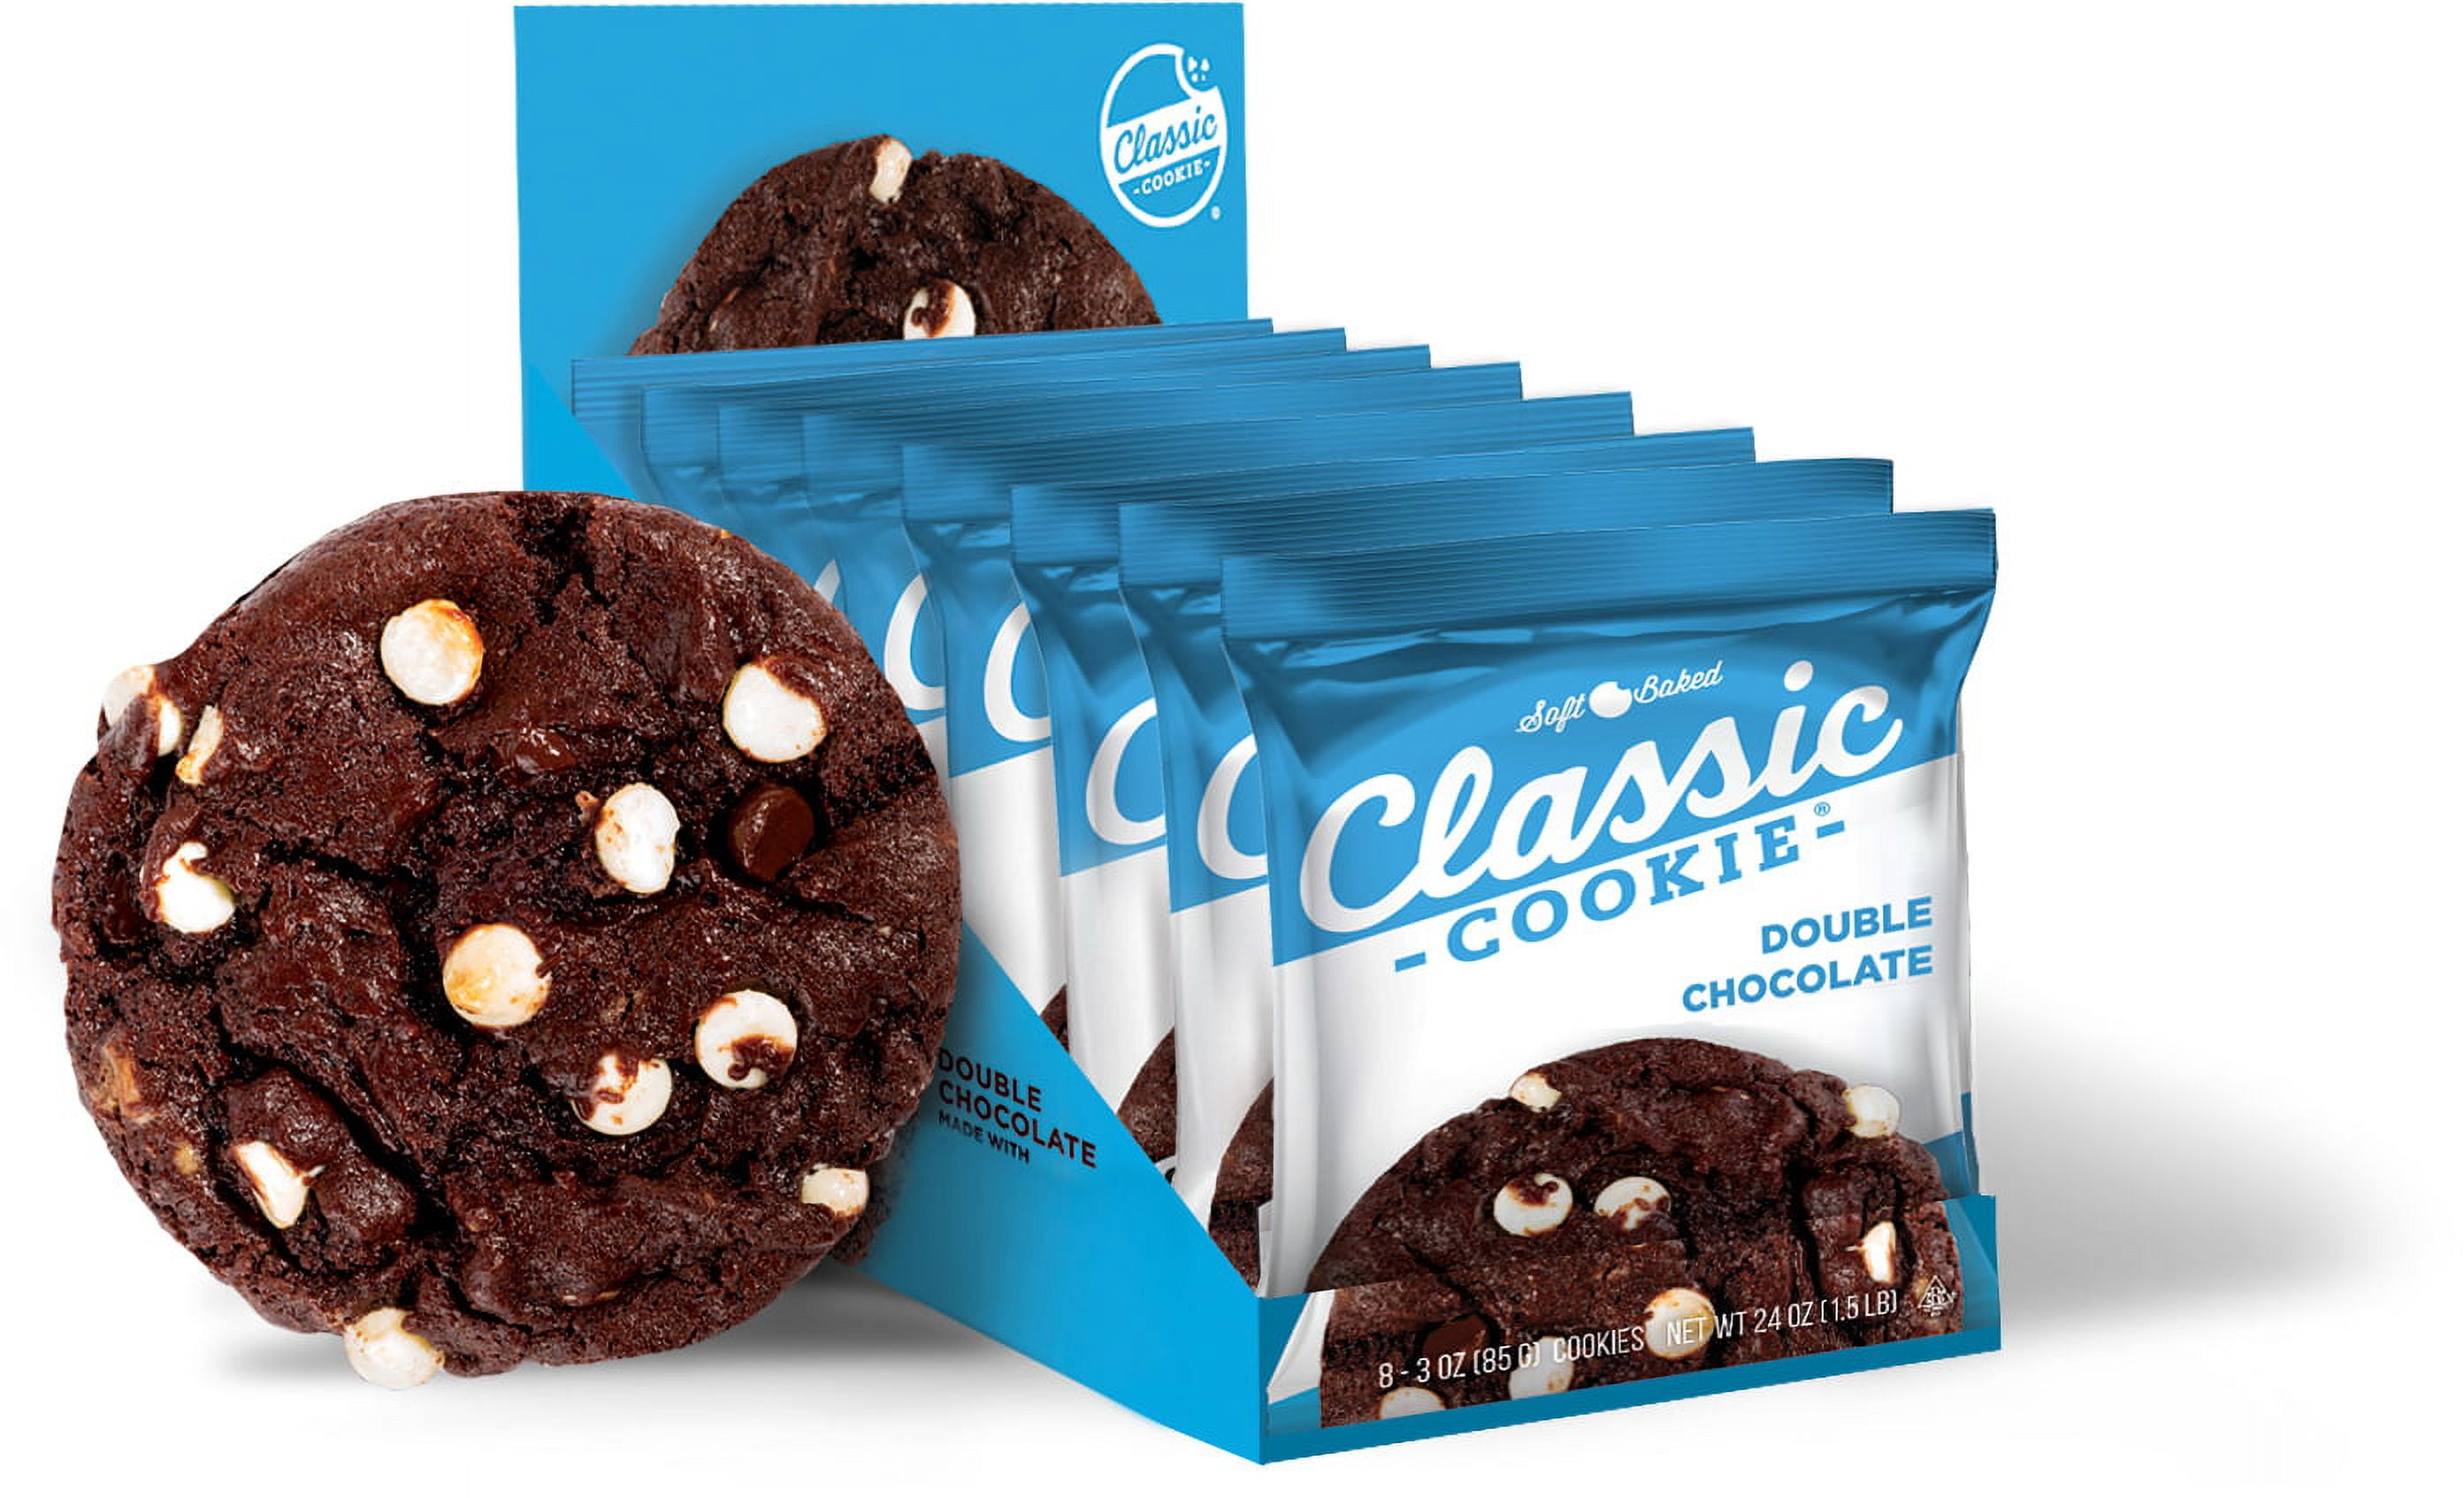 Cookies n' Créme made with Hershey's® White Chips - 3oz Cookies